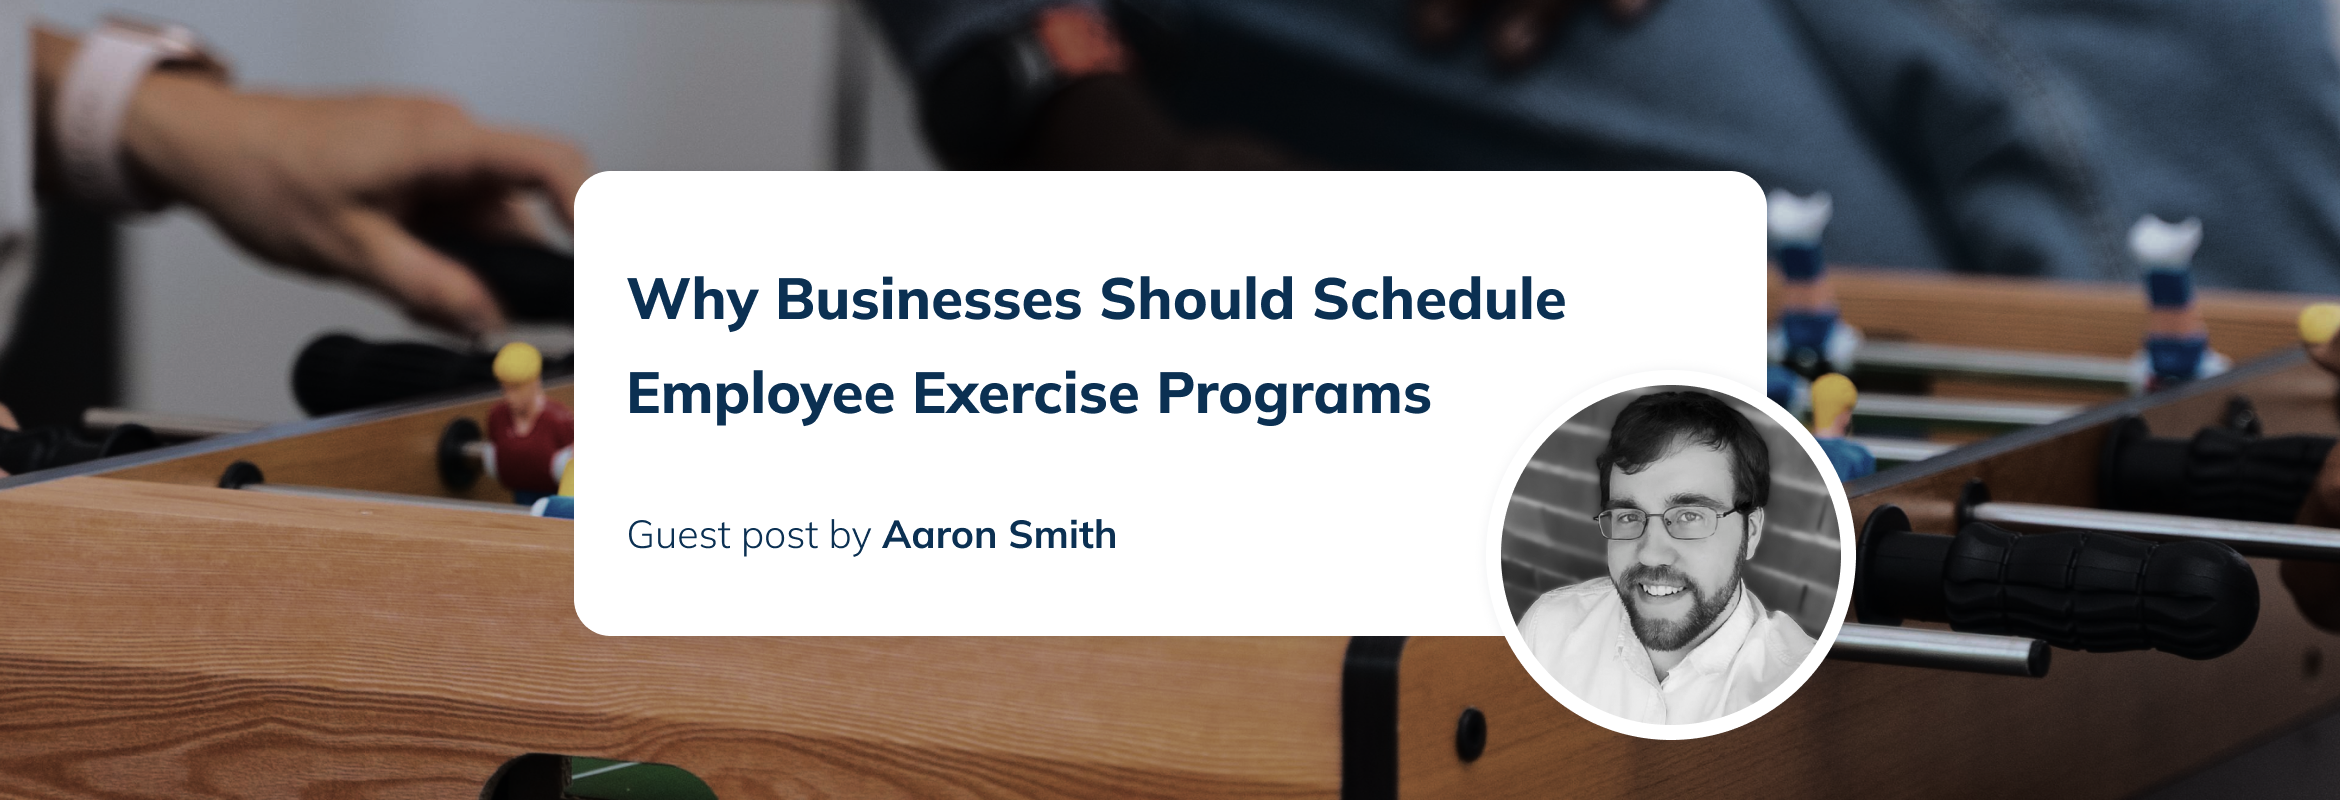 Why Businesses Should Schedule Employee Exercise Programs